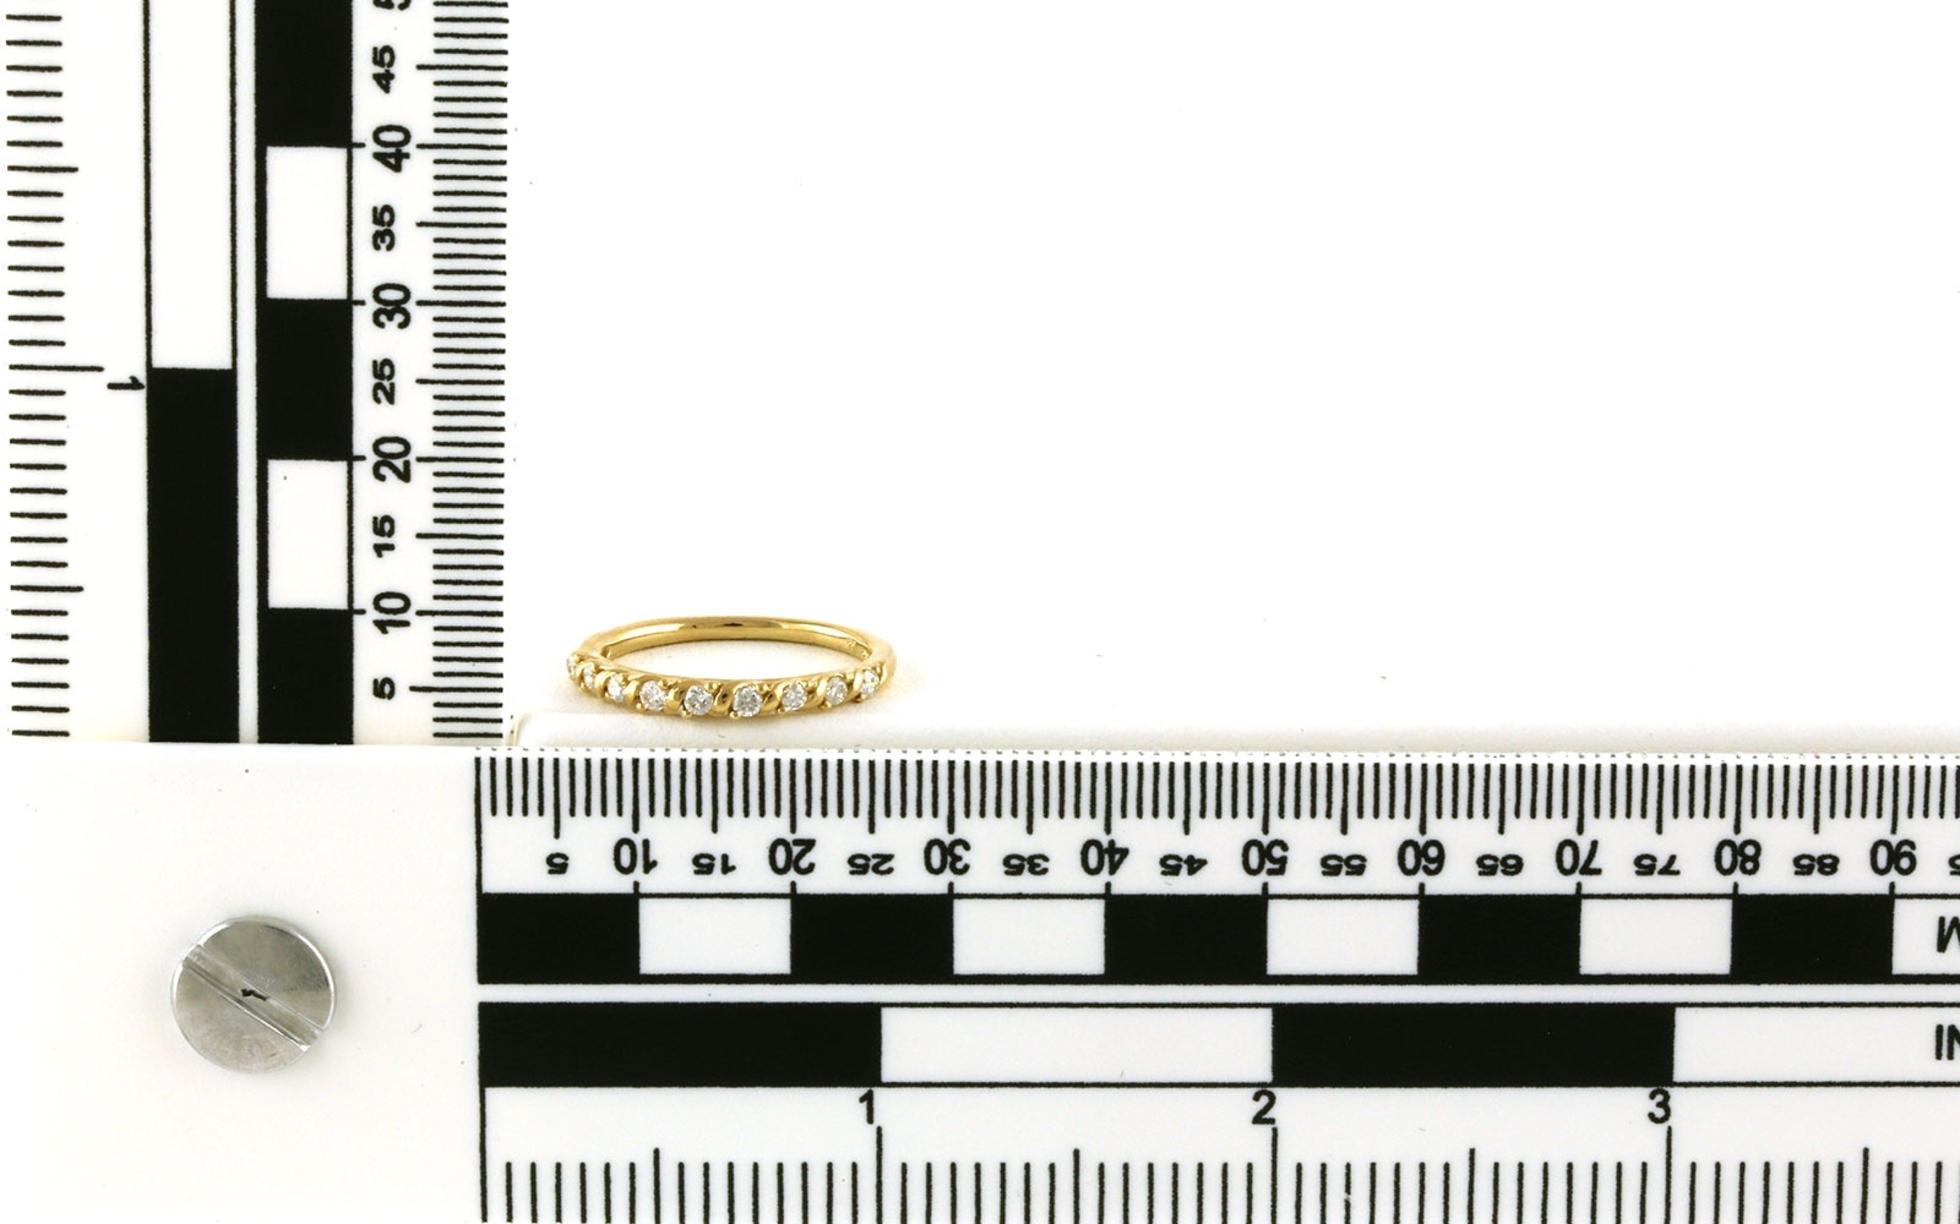 Bar and Prong-set Diamond Wedding Band in Yellow Gold (0.25cts TWT) Scale